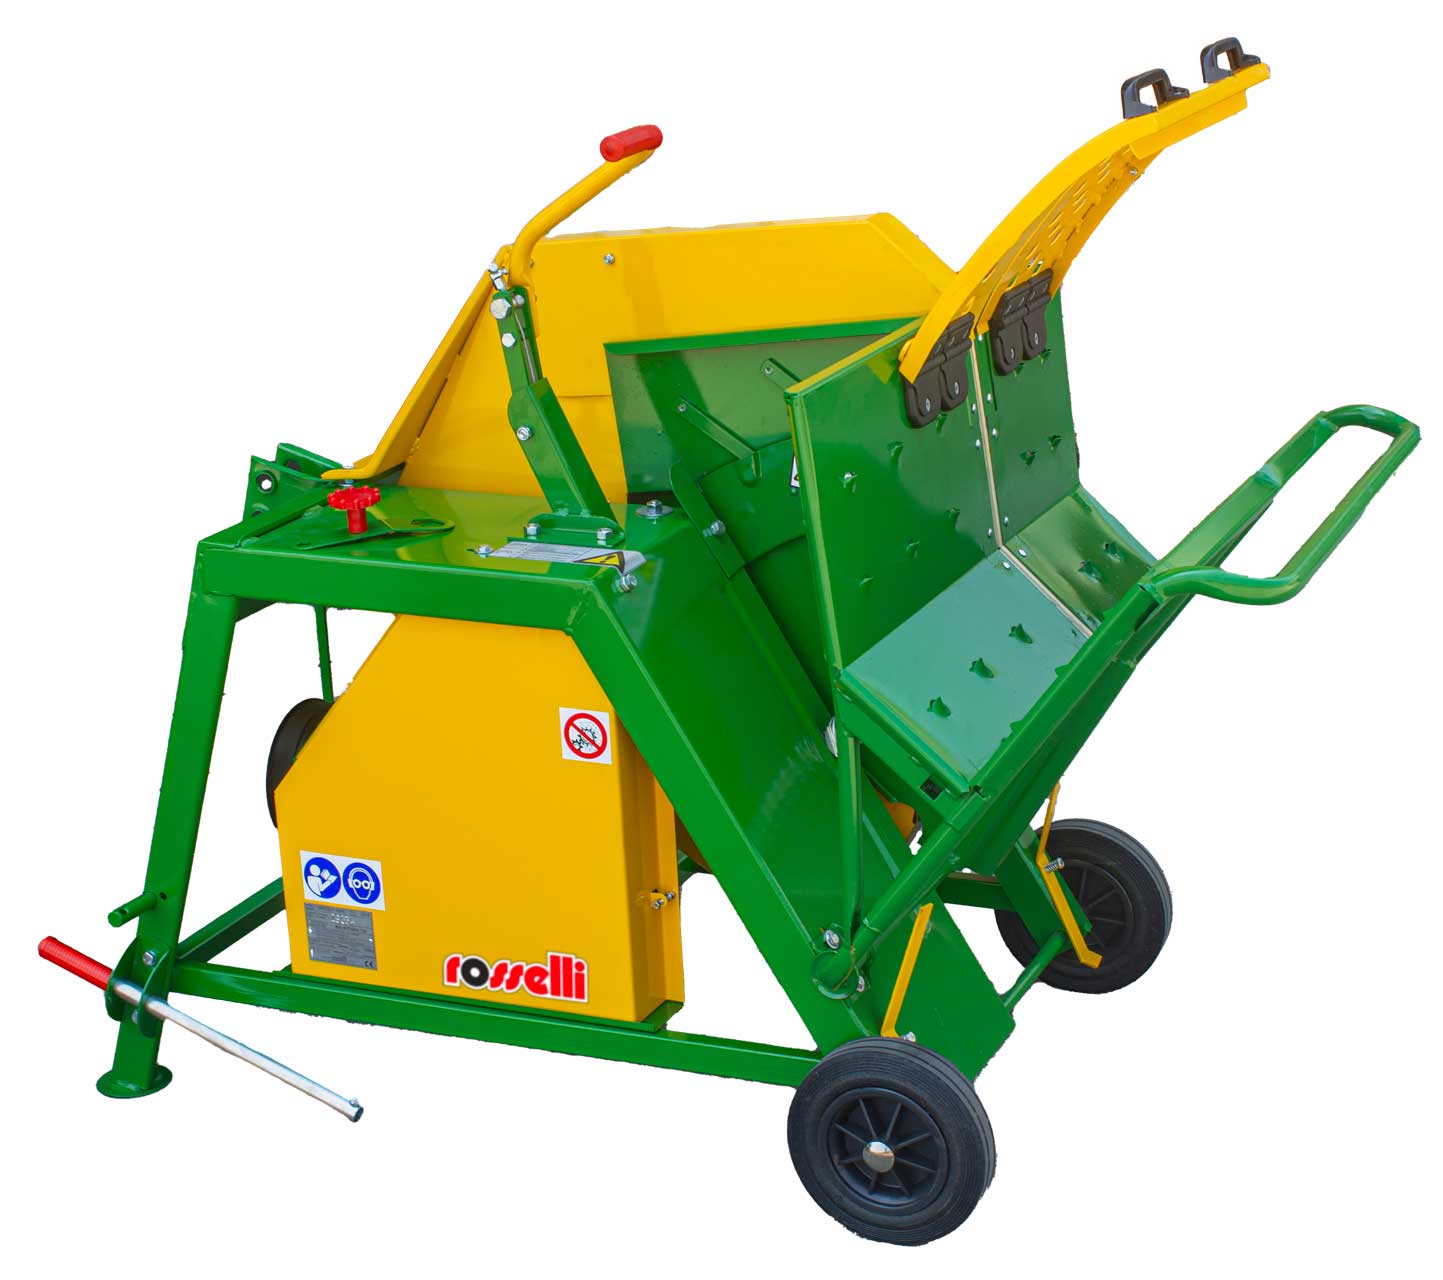 Machine for cutting wood easily model Grizzly R